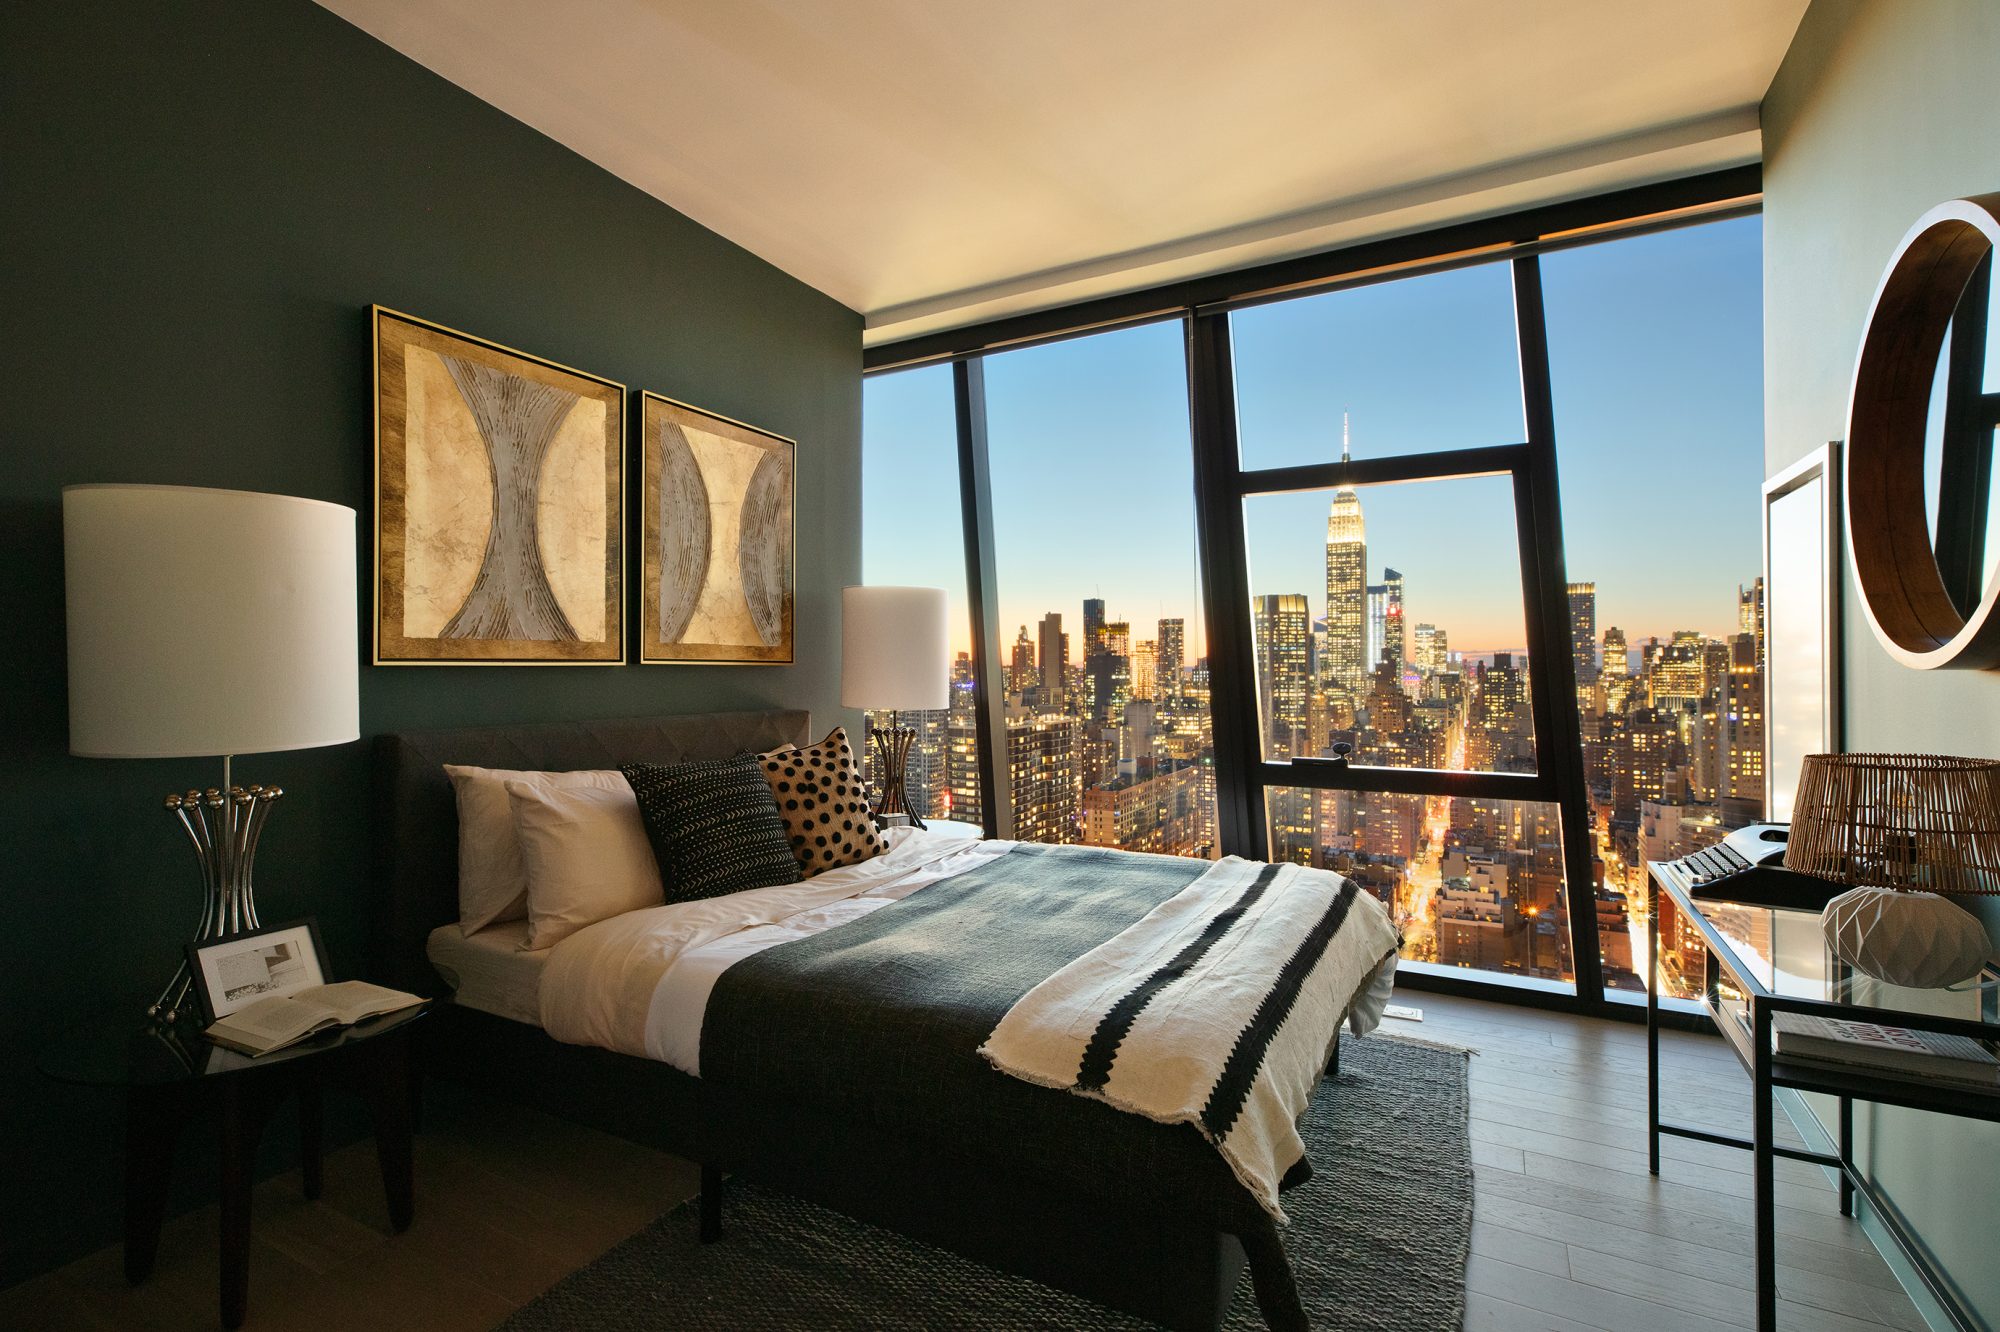 American Copper Buildings at 626 First Avenue embodies innovative luxury in New York’s skyline